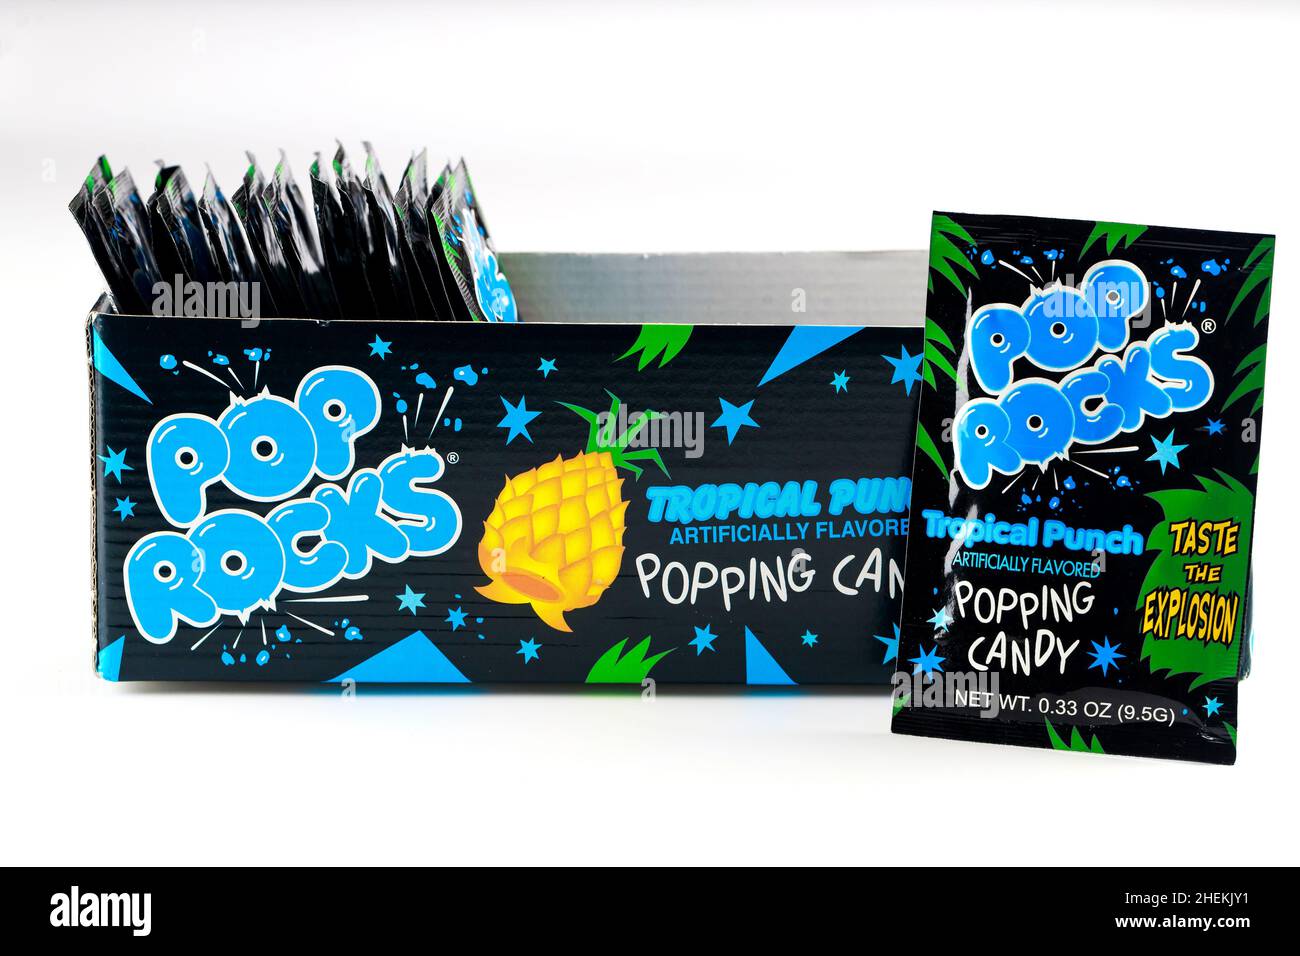 May 4, 2021. New York, US. Tropical punch Pop Rocks candy on white background. Stock Photo